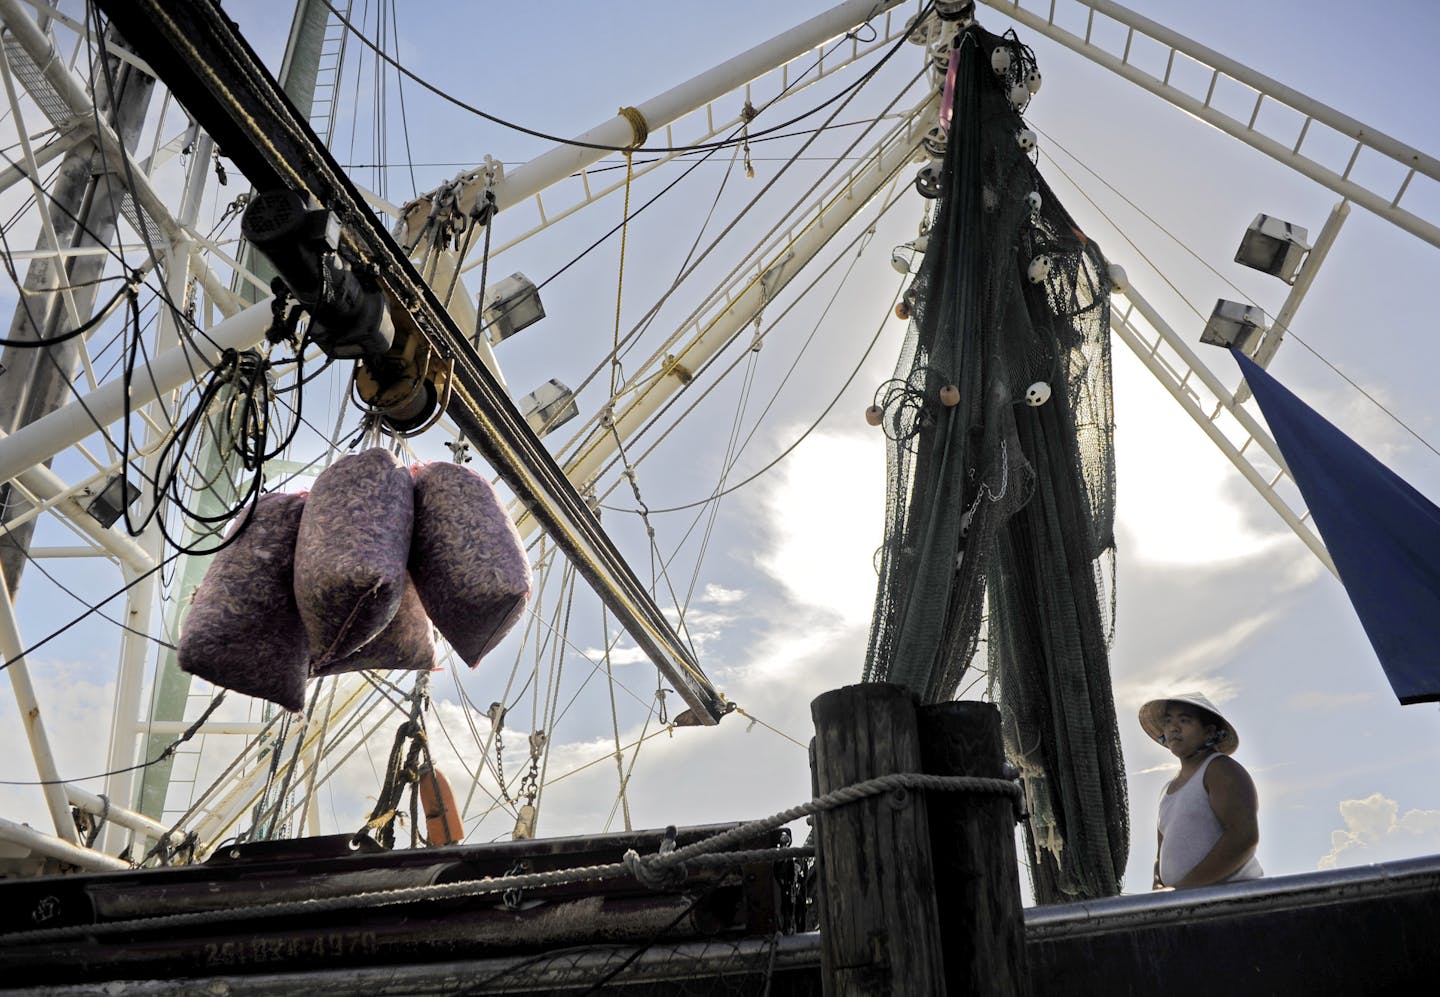 A fisherman in a round hat watches stands on a boat with rigging as bags of shrimp being moved off by a boom arm.